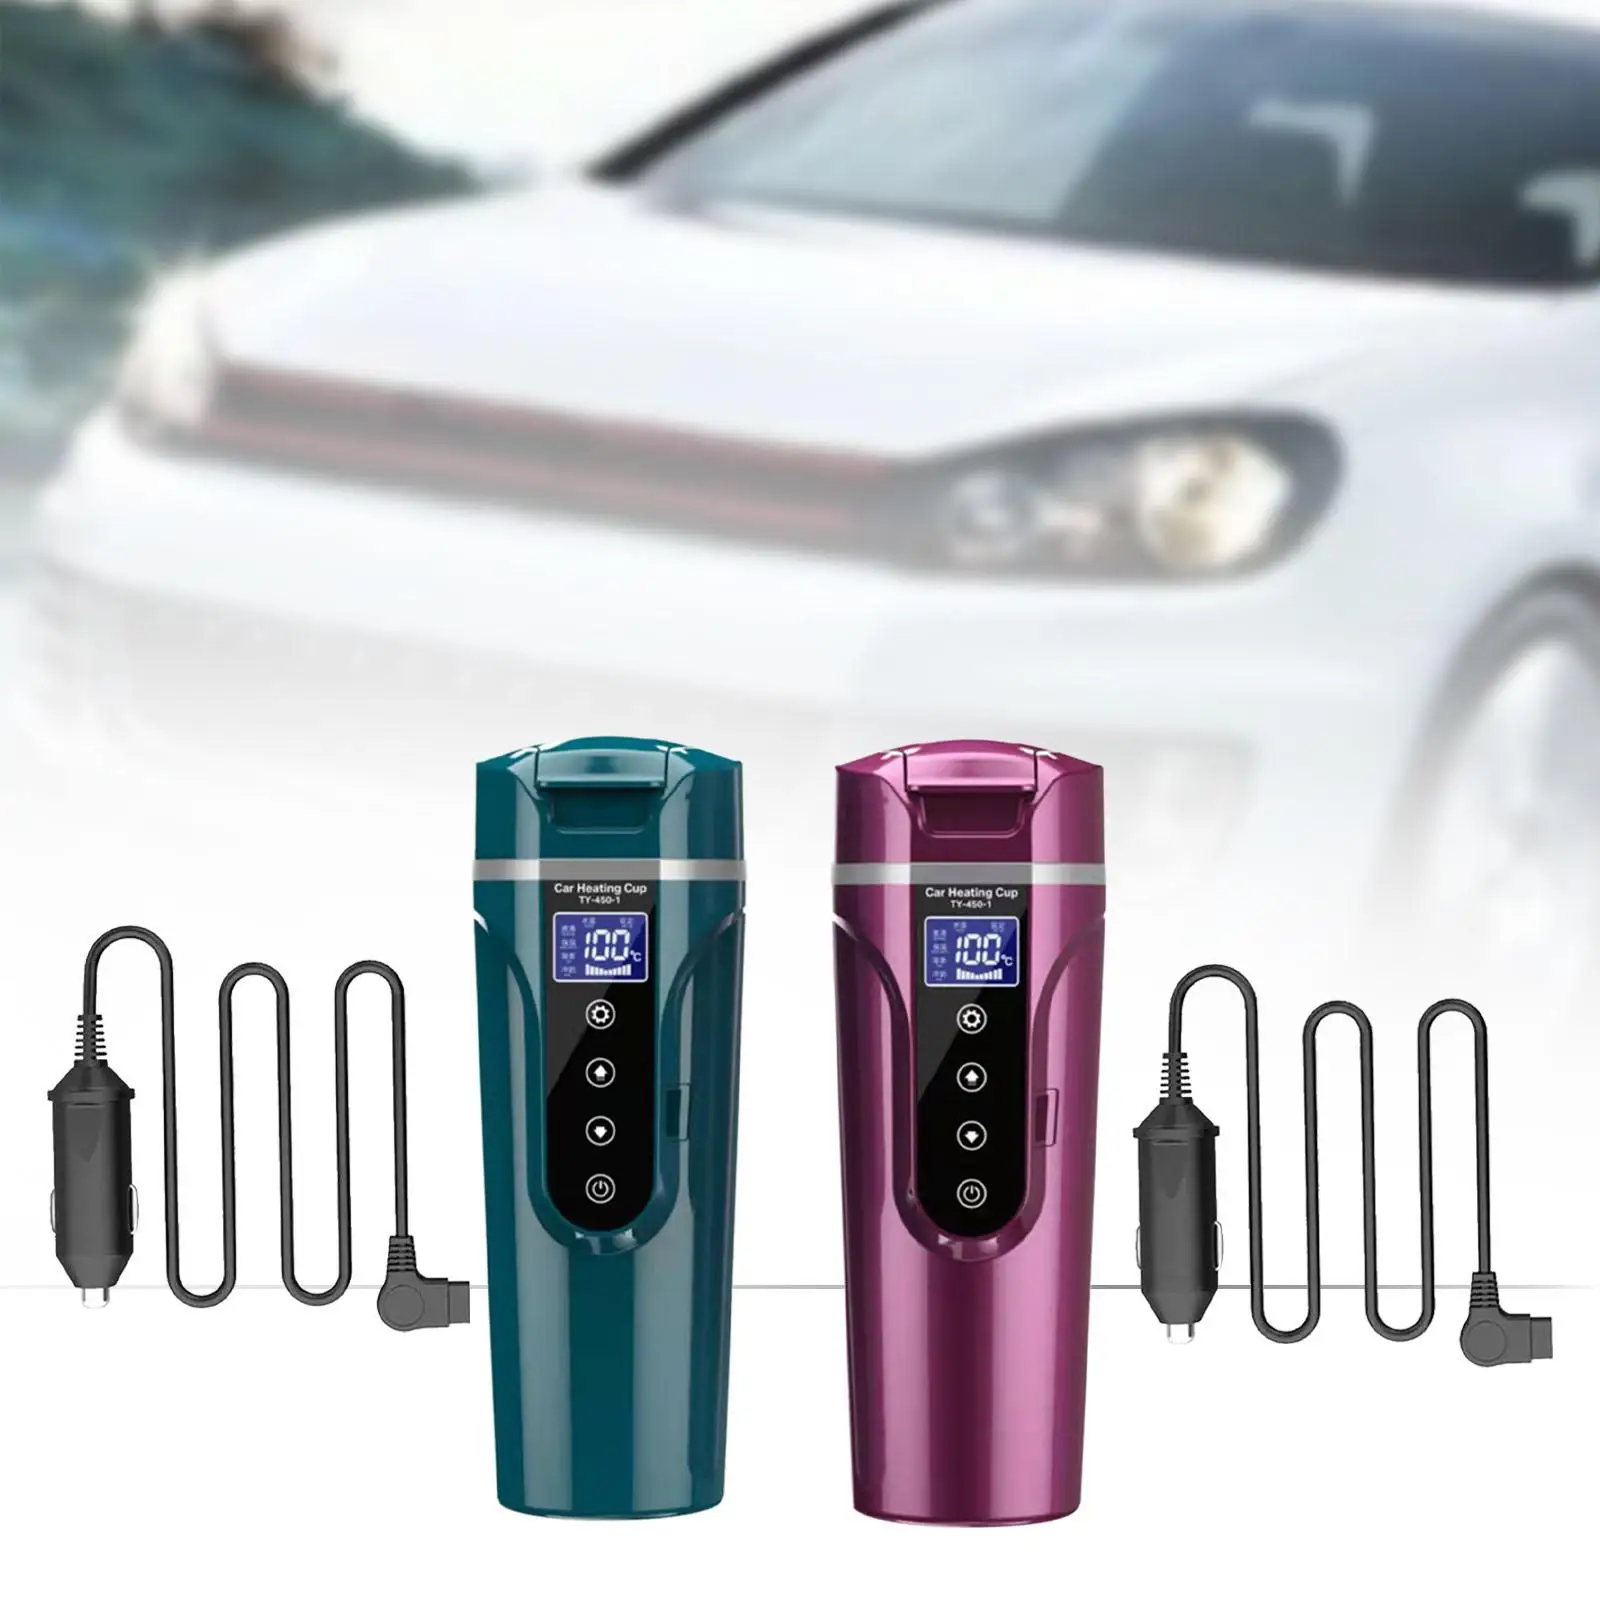 24V/12V Electric Travel Kettle Quick Heating Stainless Steel Car Heating Mug Car Kettle for Tea Coffee Water Milk Travel